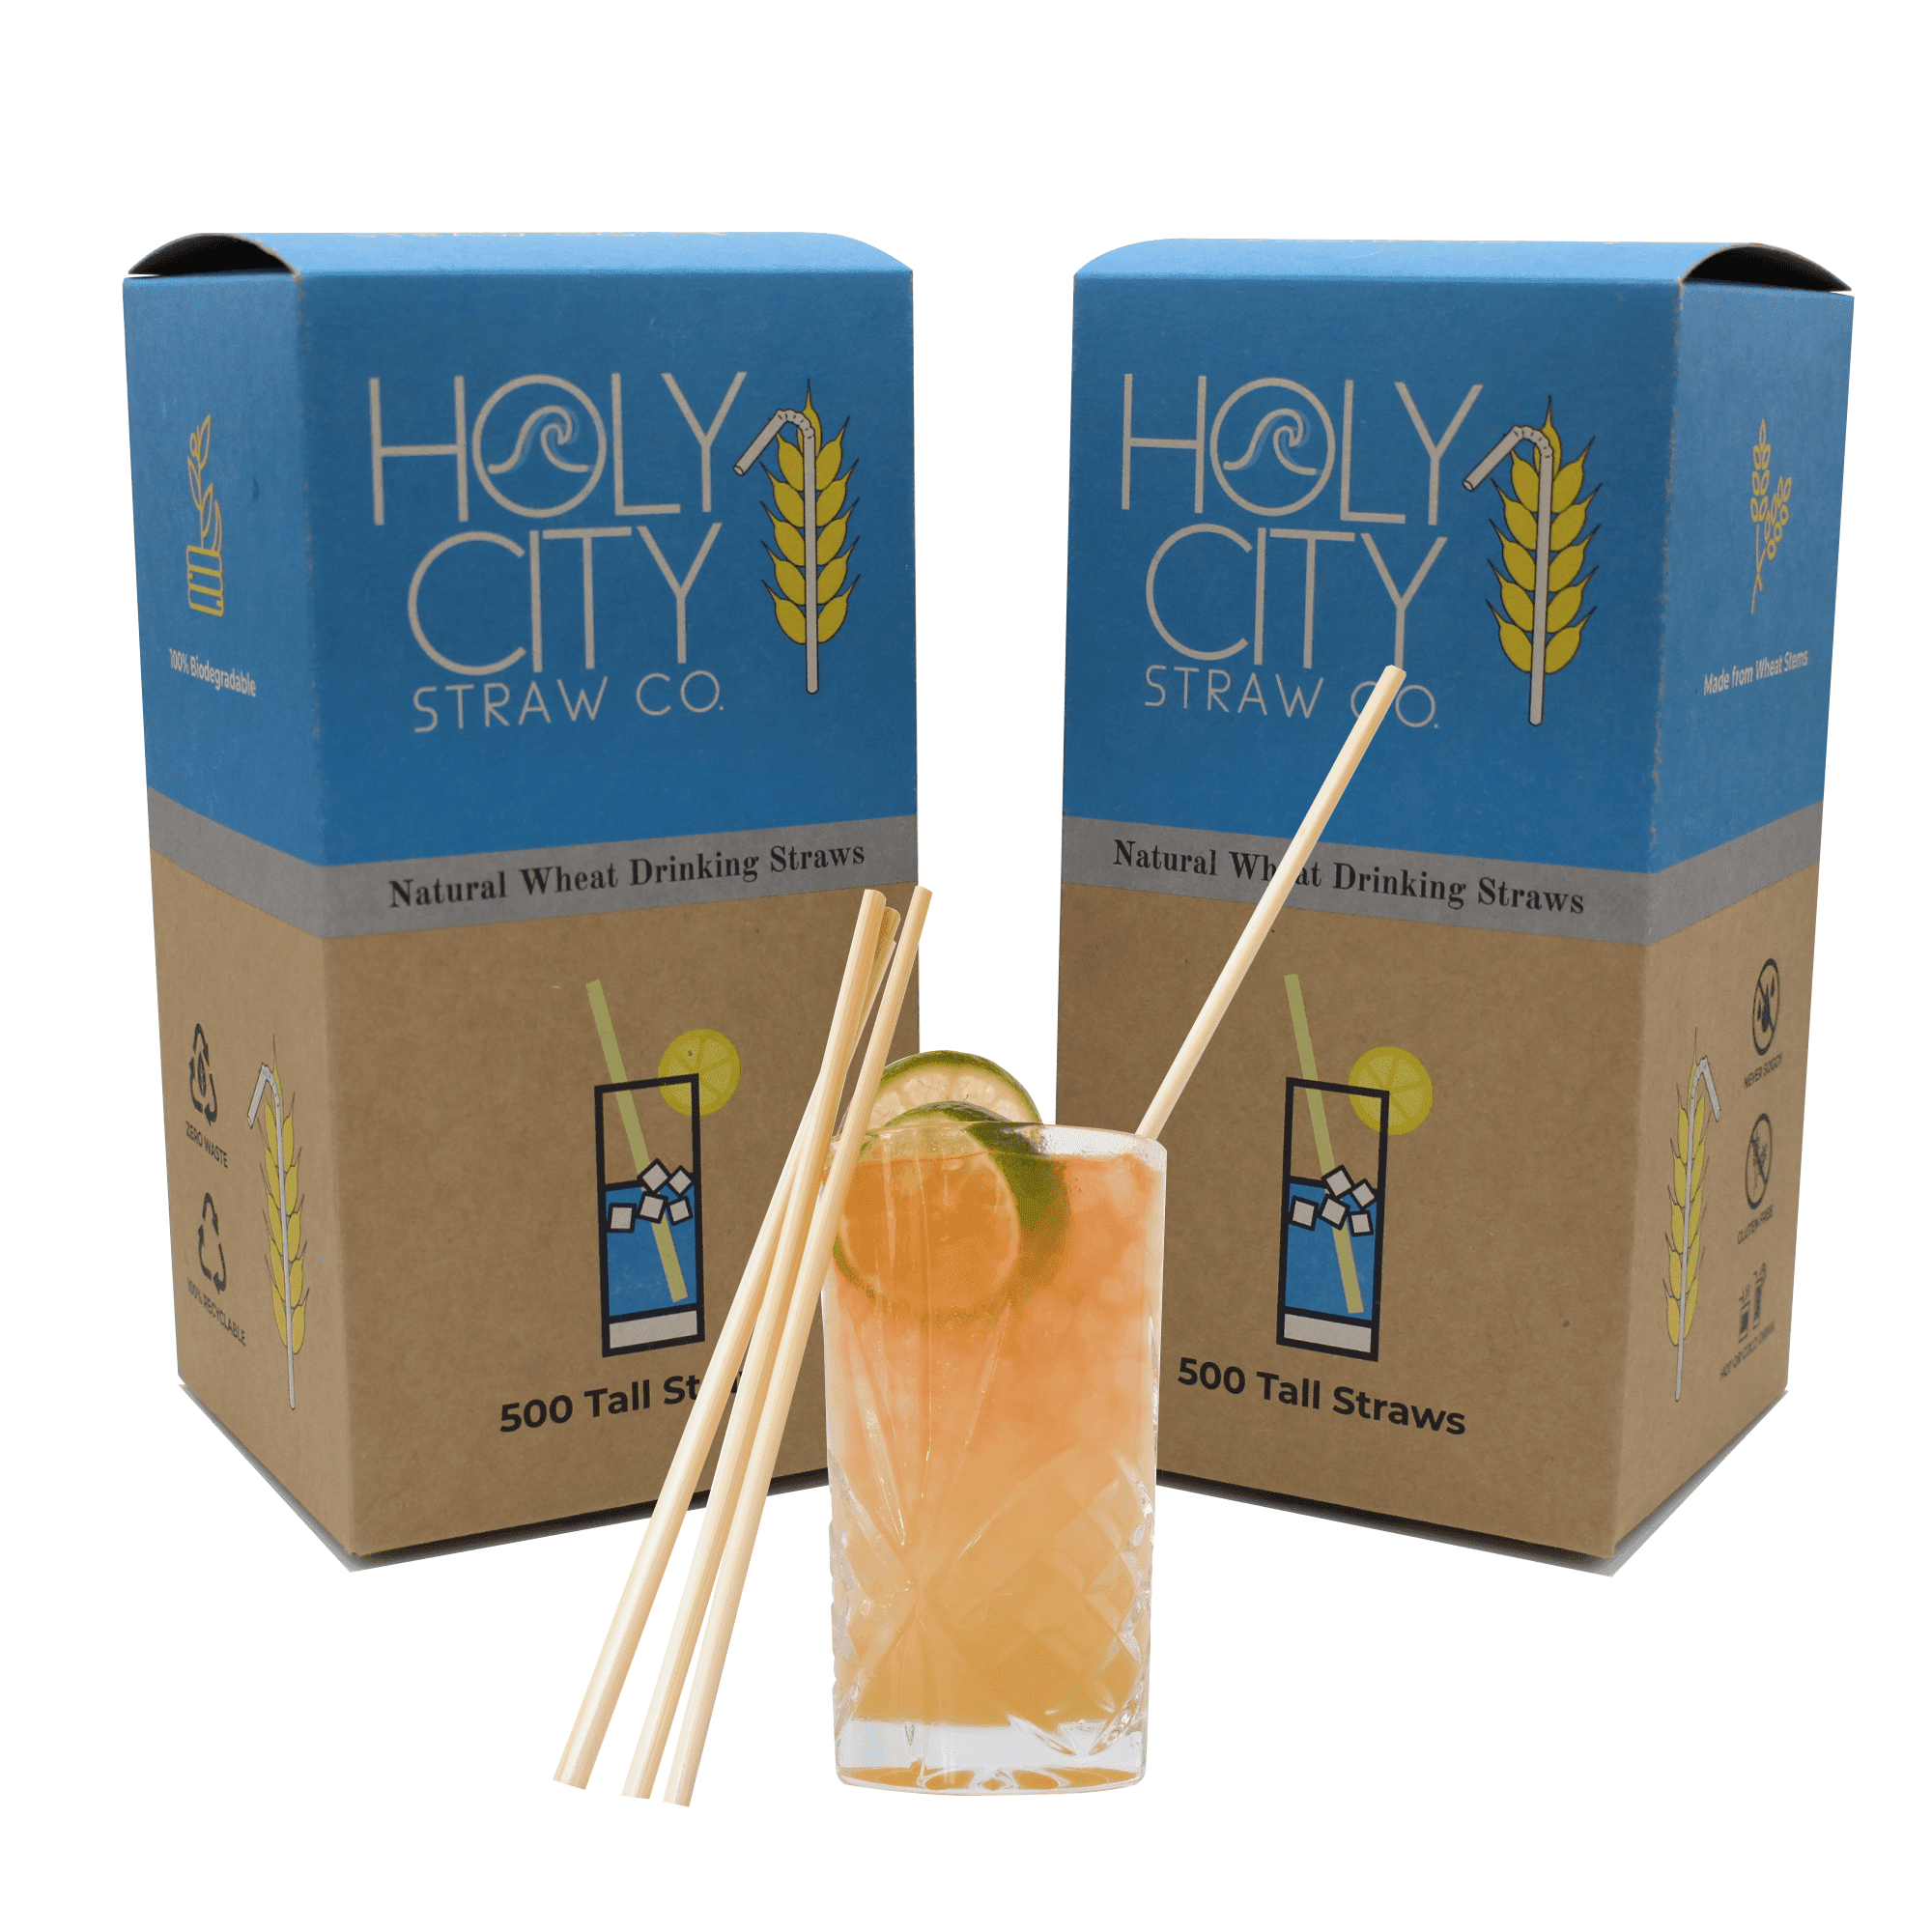 Two 500 count boxes of Holy City Tall Straws with Glass of Straws